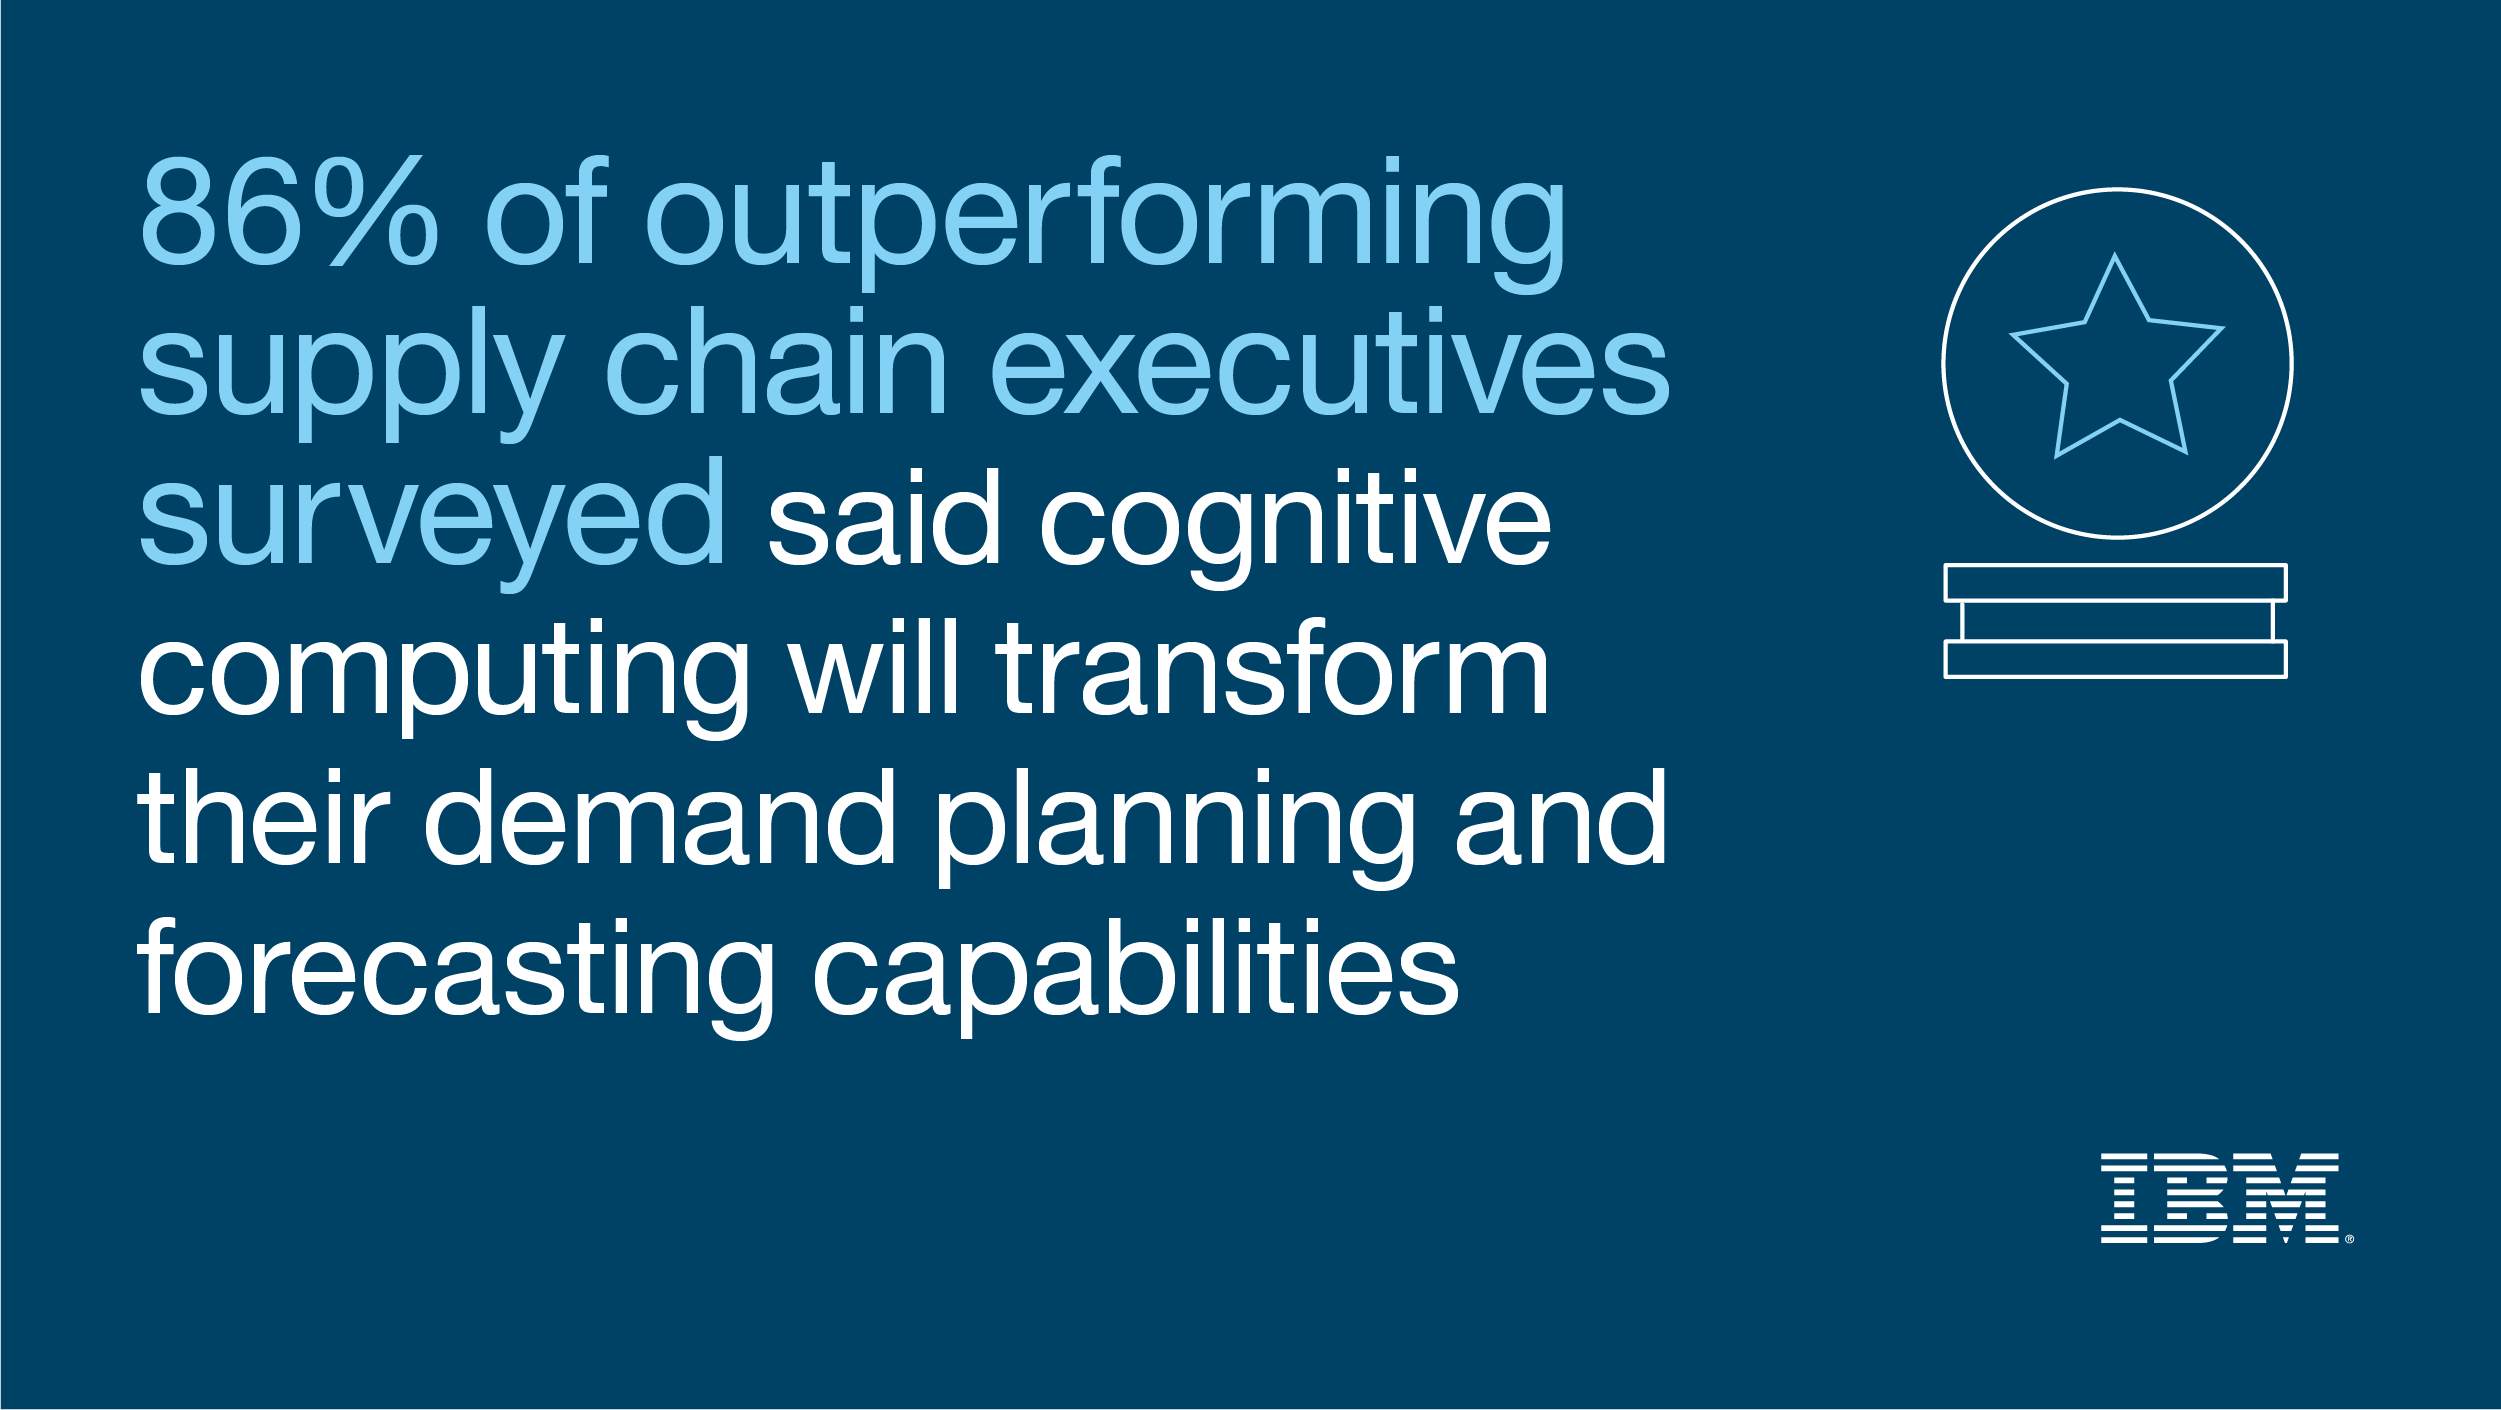 86% of outperforming supply chain executives surveyed said AI and cognitive computing will transform their demand planning and forecasting capabilities.